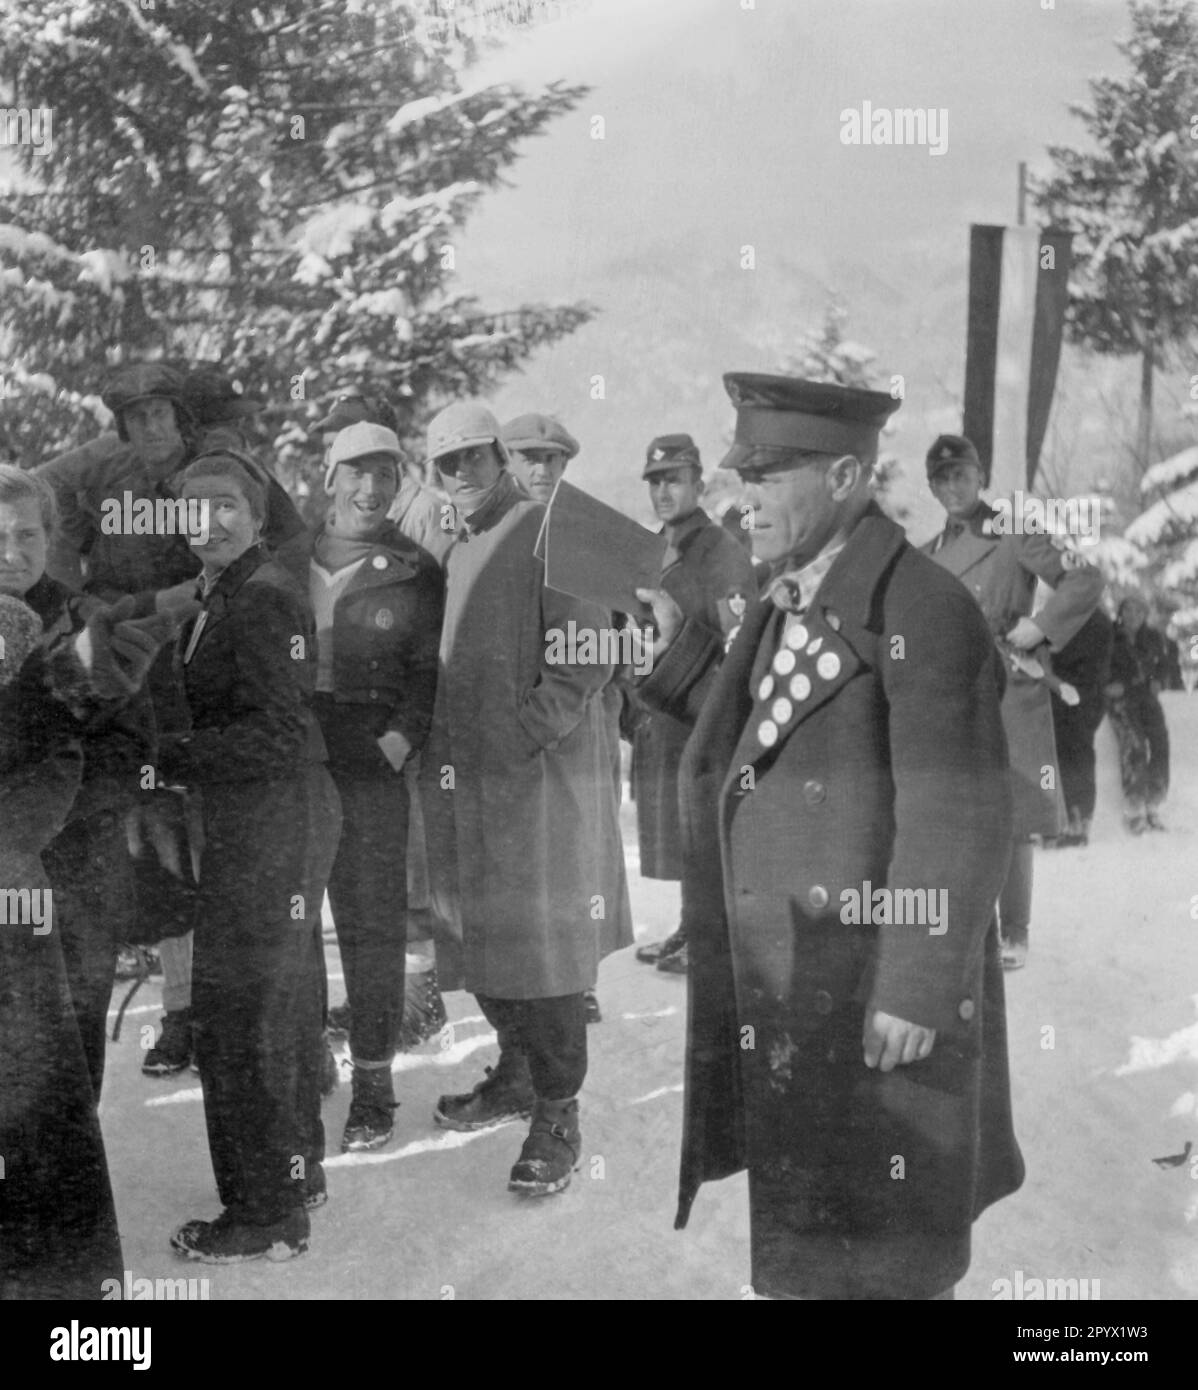 Athletes of the international tournament are waiting in line. Behind them are German soldiers. Undated photo, probably in the winter of 1933/1934. Stock Photo